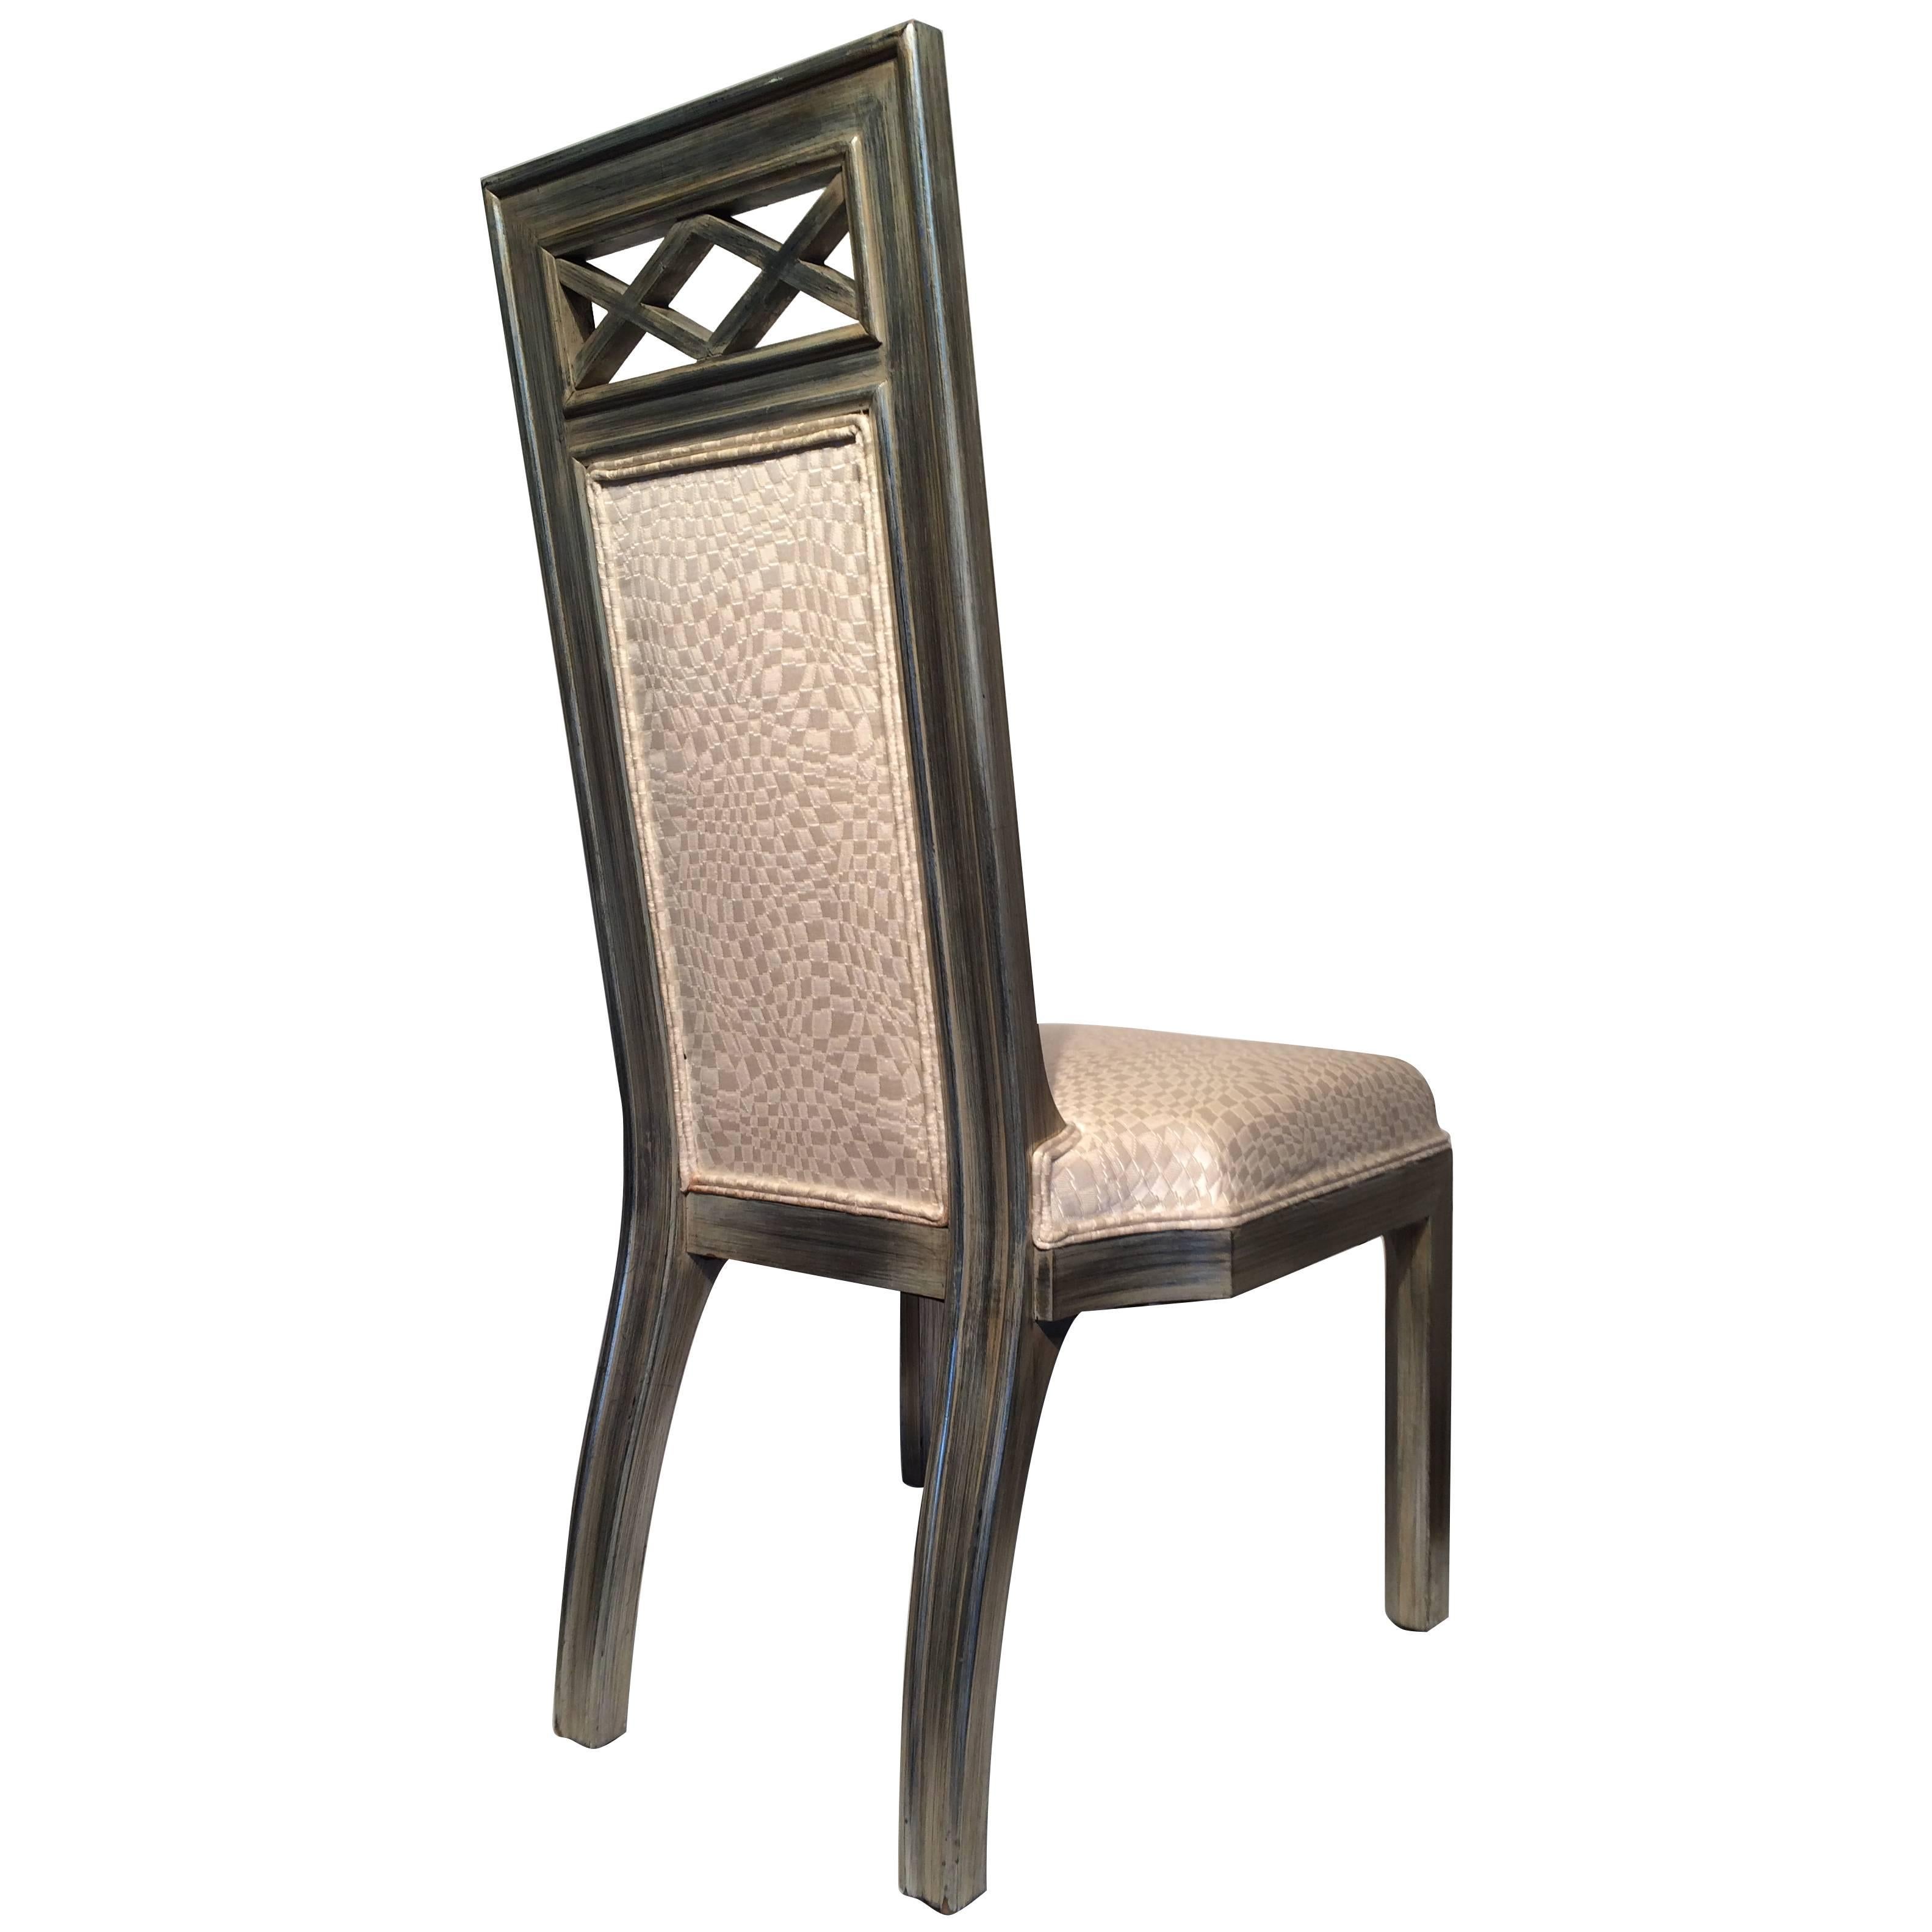 James Mont Silver Leaf Occasional Chair